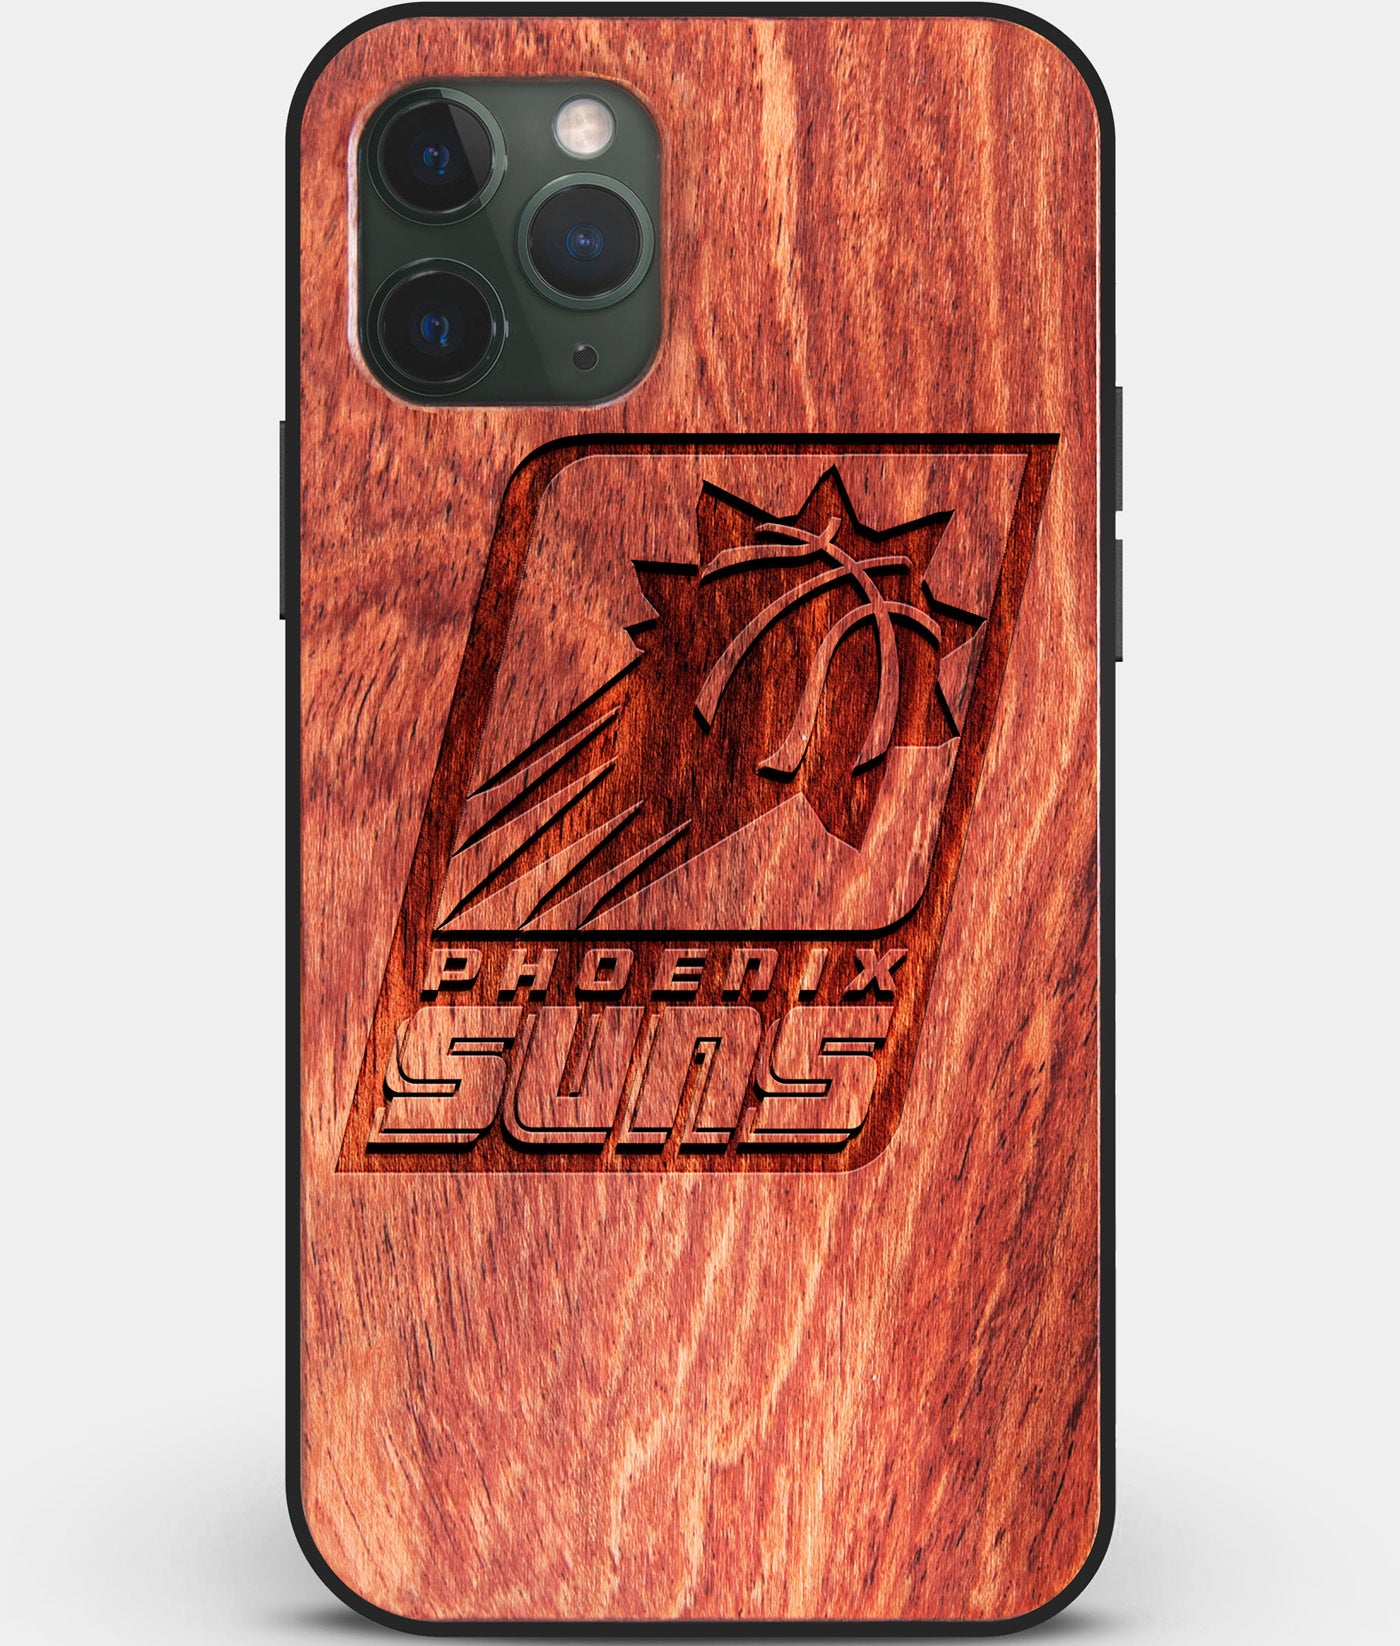 Custom Carved Wood Phoenix Suns iPhone 11 Pro Case | Personalized Mahogany Wood Phoenix Suns Cover, Birthday Gift, Gifts For Him, Monogrammed Gift For Fan | by Engraved In Nature